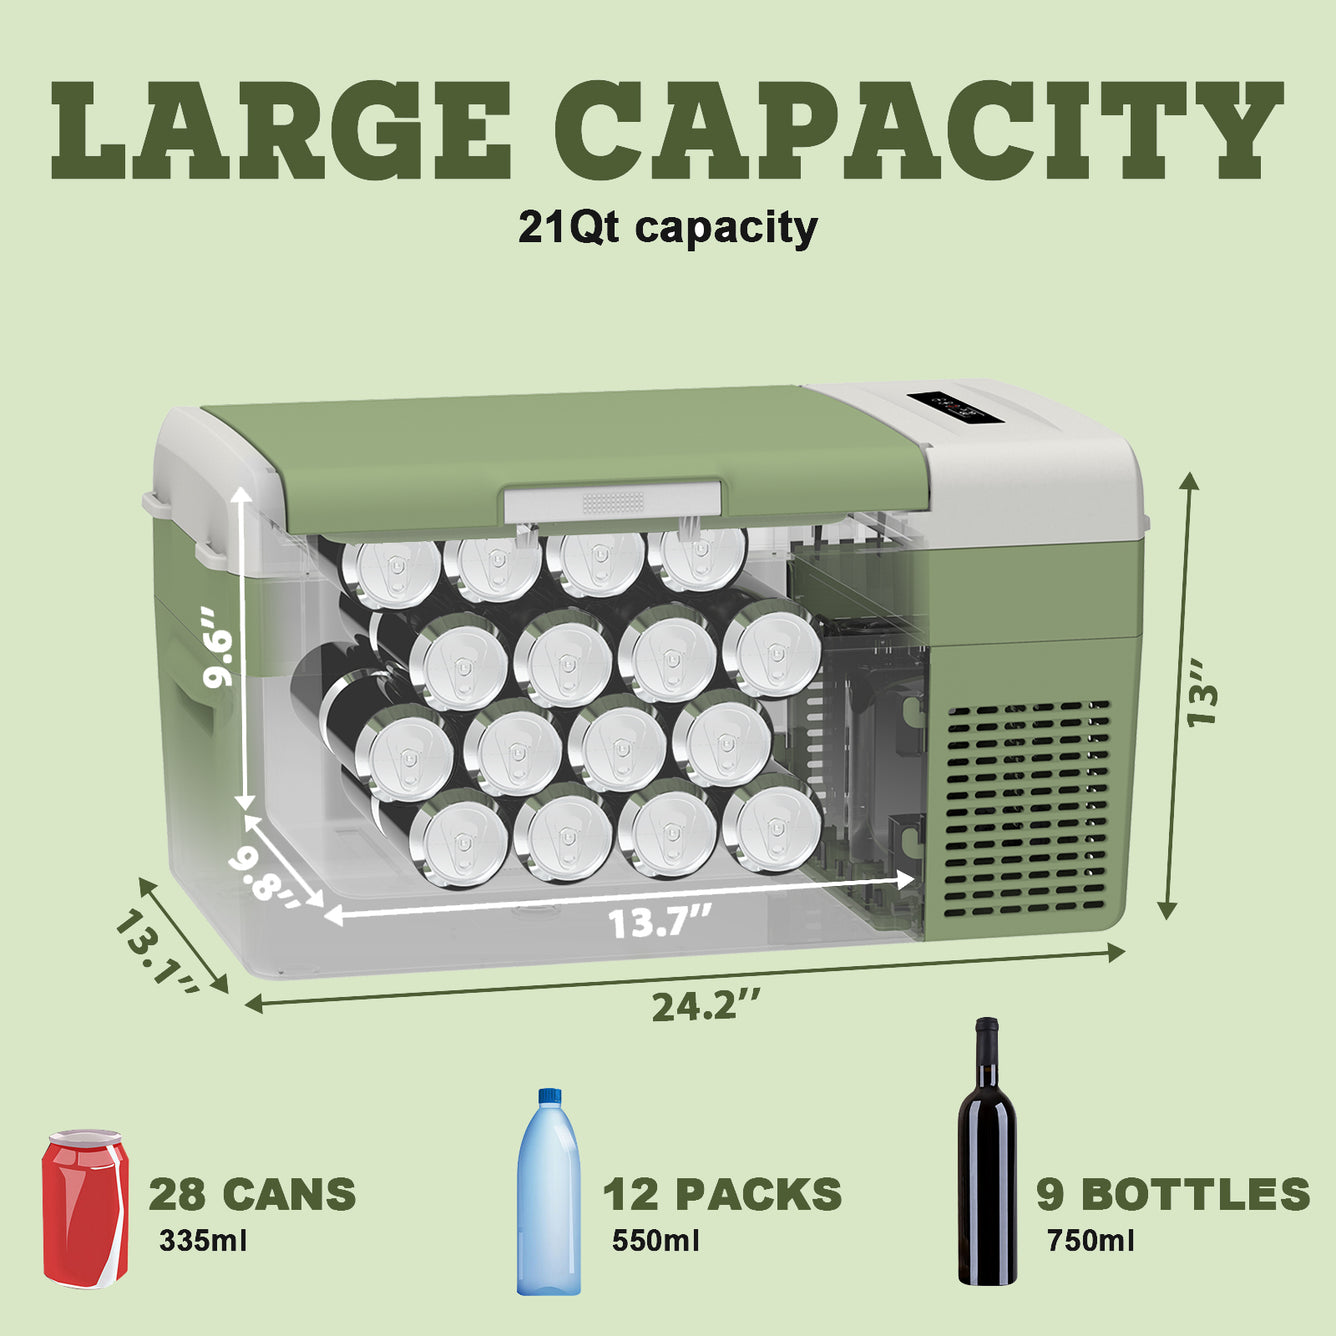 Setpower 21Qt Portable Refrigerator FC20 holds Up To 28 Can of Coca Cola, Use less space but large capacity. 